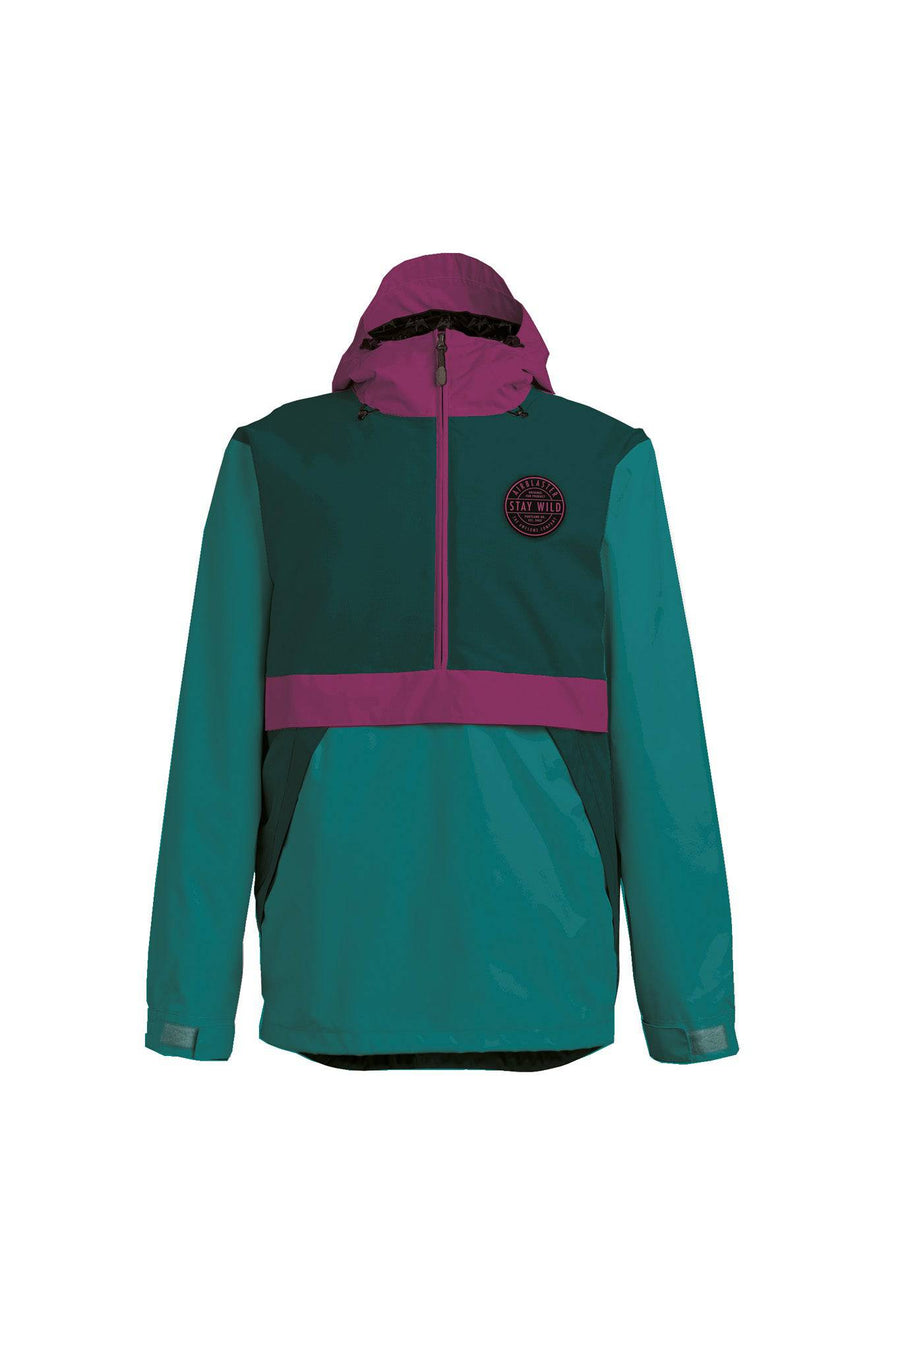 Airblaster Trenchover Jacket in Spruce and Magenta 2023